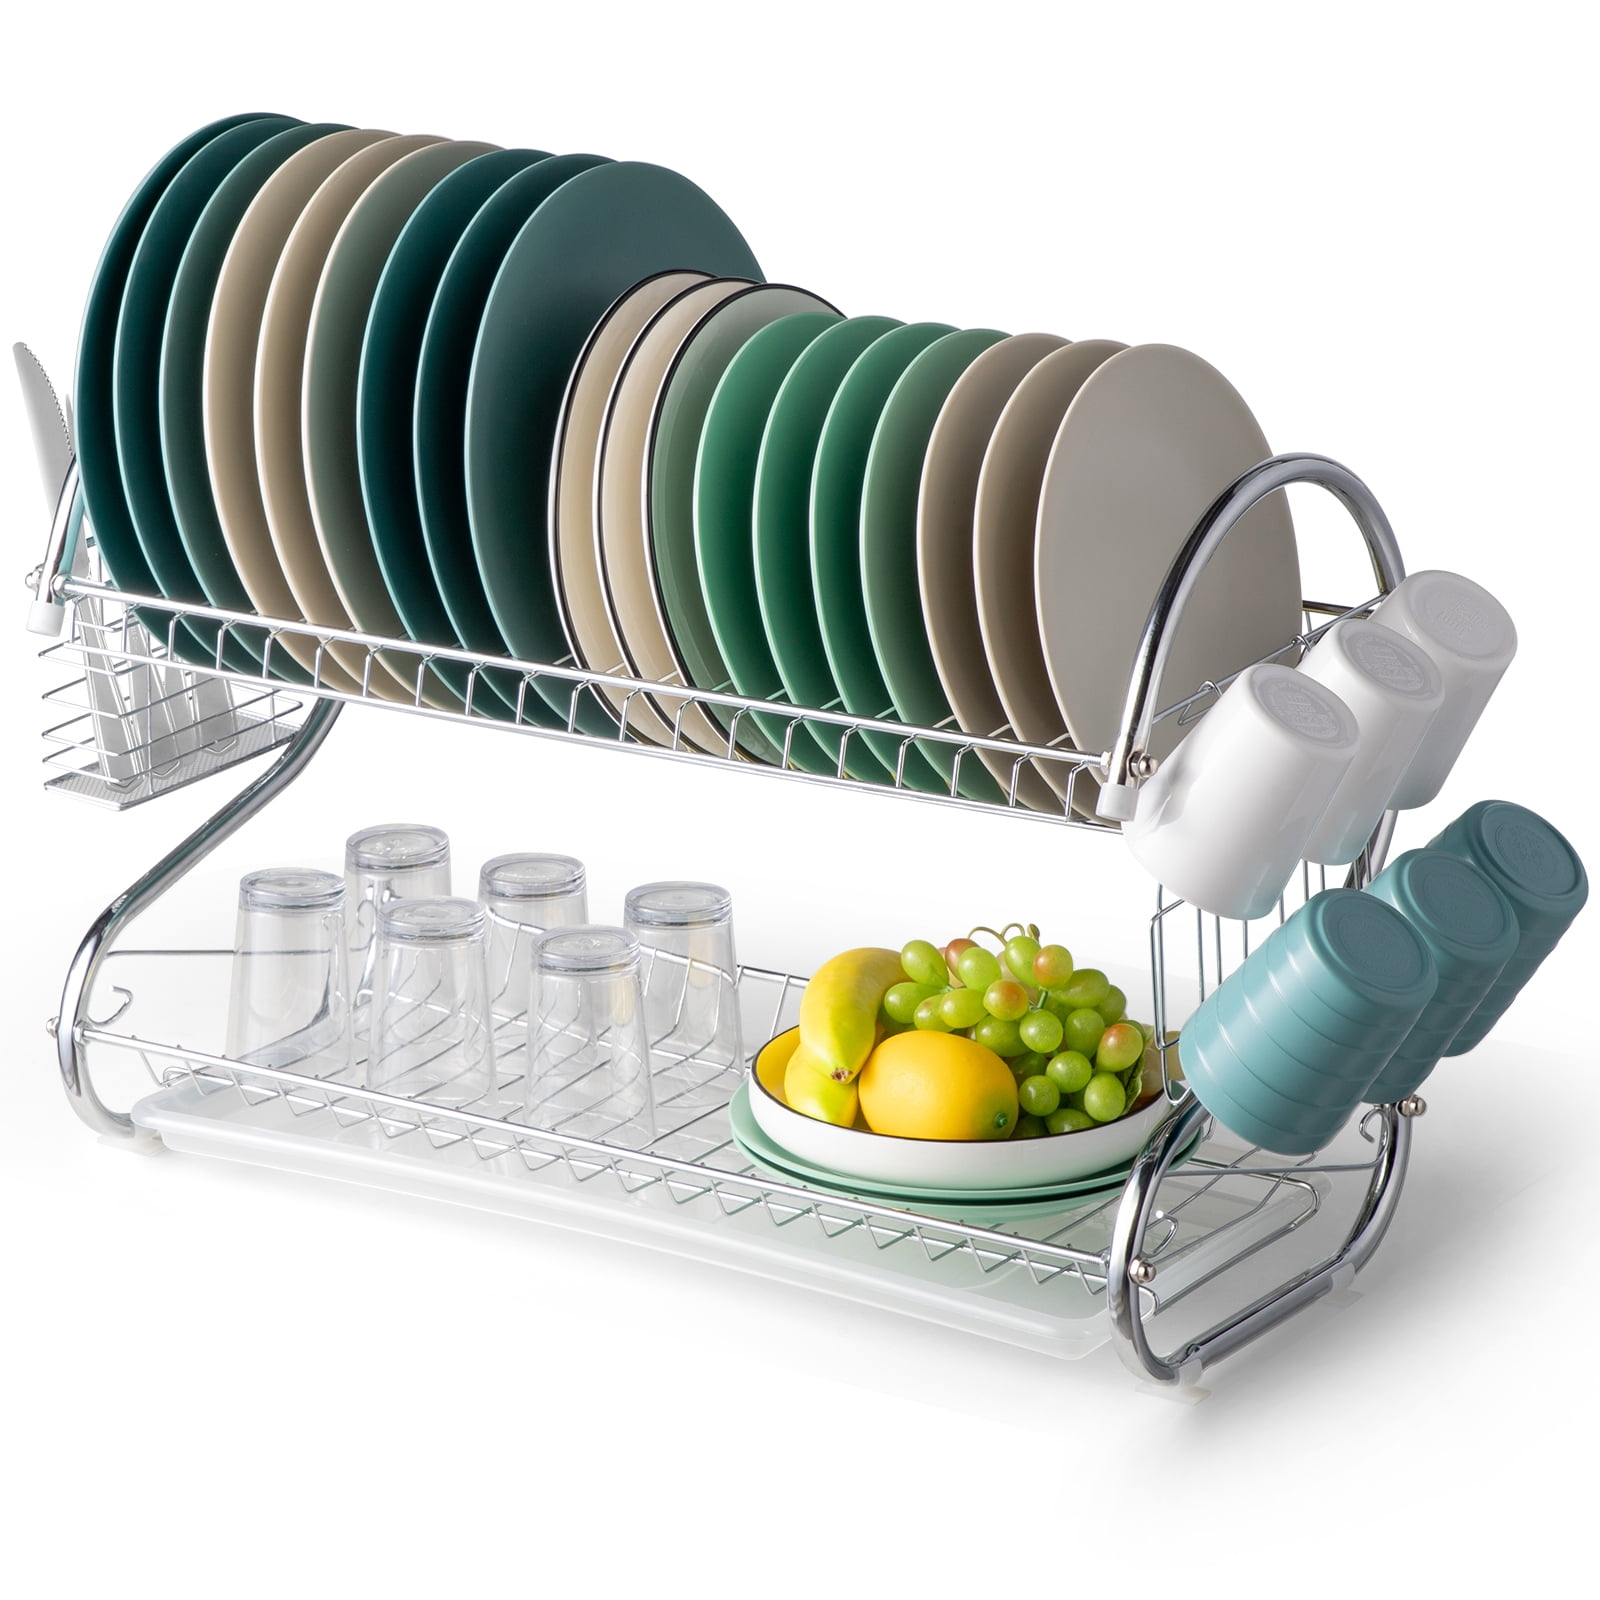 Two-tier Dish Drying Rack – Seiton